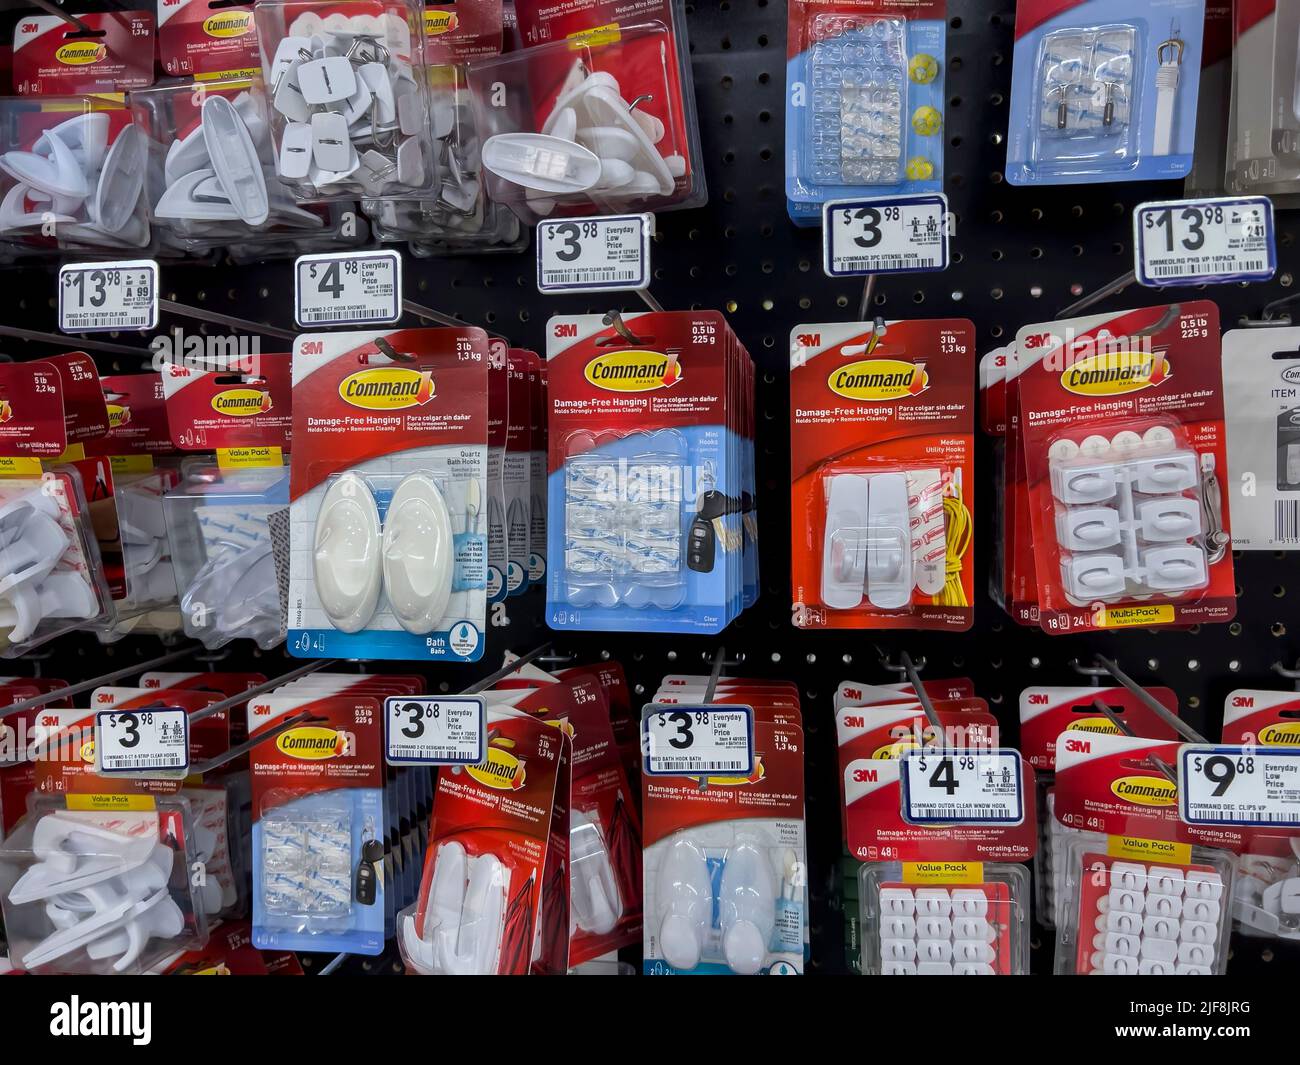 Seattle, WA USA - circa June 2022: Close up view of Command Strip products for sale inside a Lowe's home improvement store. Stock Photo